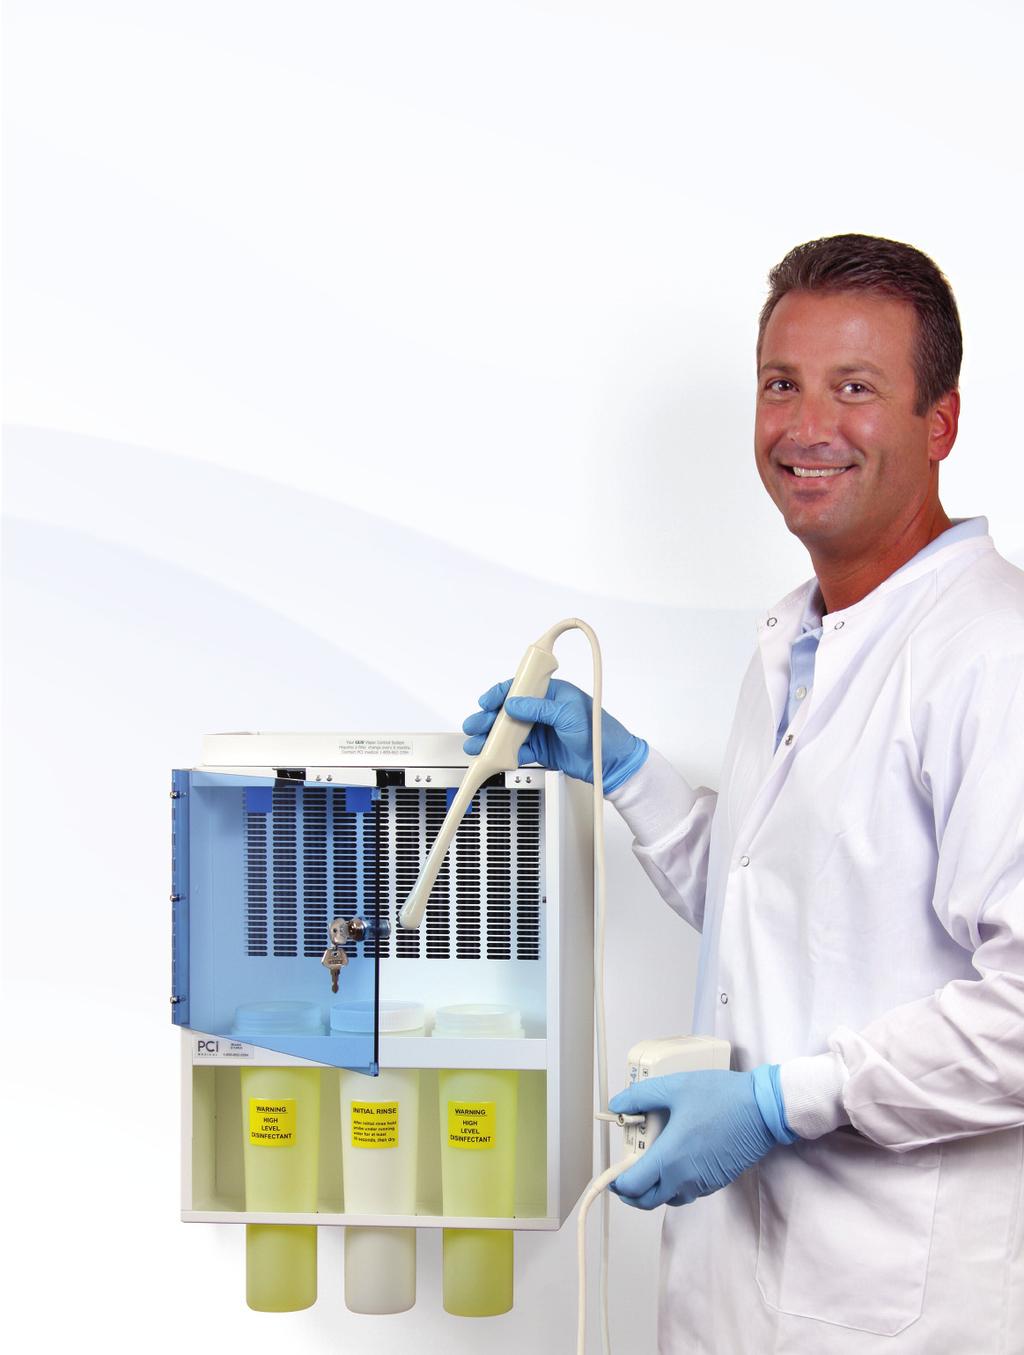 VAPOR CONTROL SYSTEMS FOR ULTRASOUND GUS SYSTEMS LET YOU WORK SAFELY WITH OPA & GLUTARALDEHYDE.